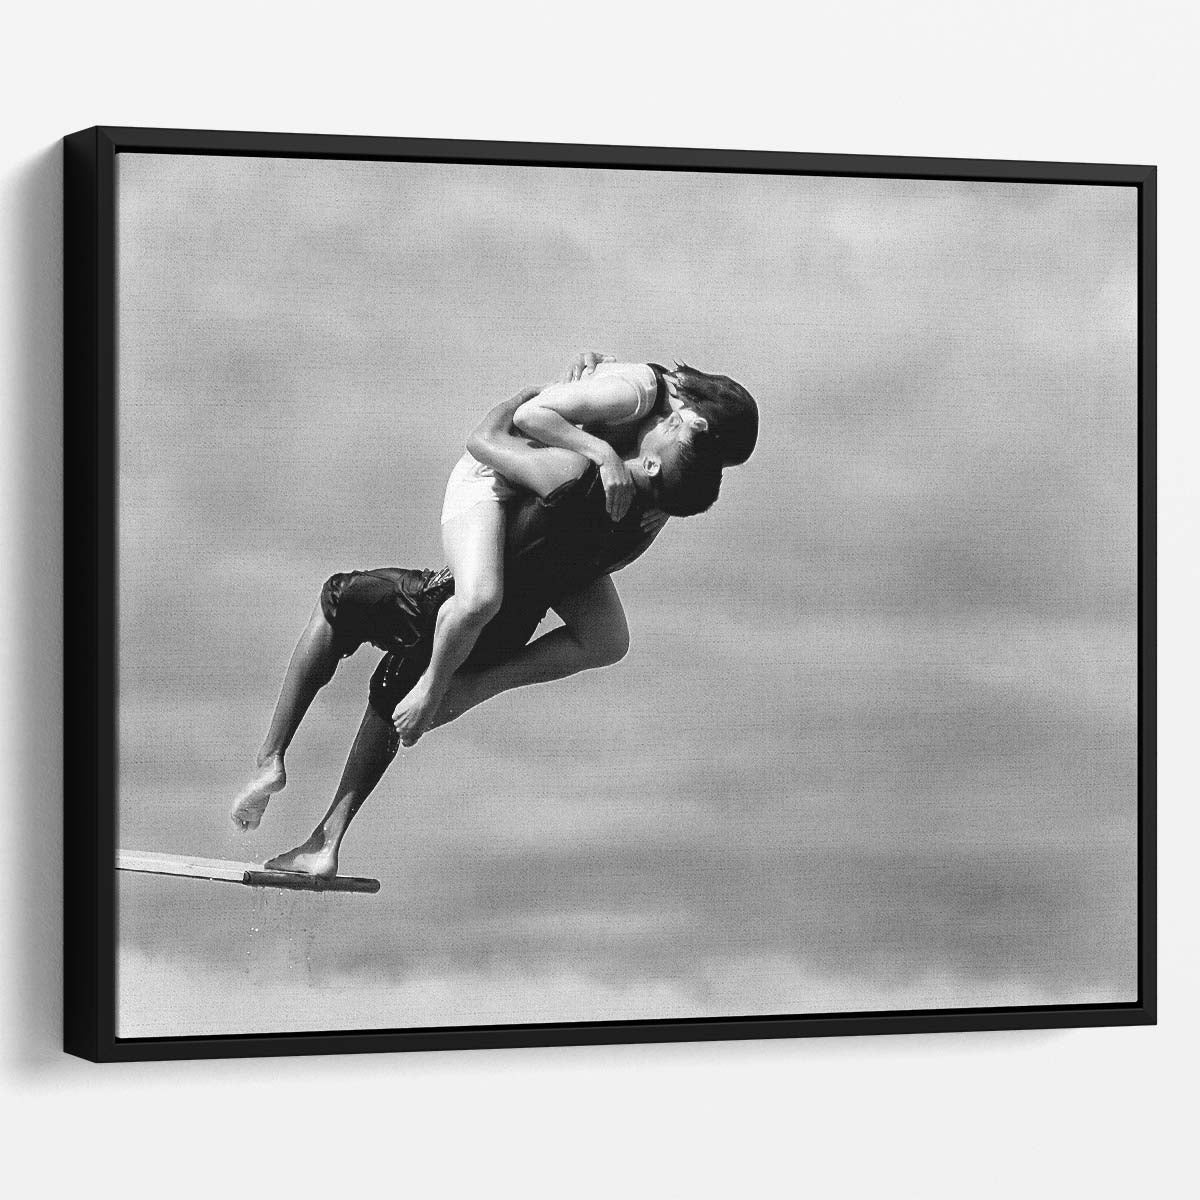 Romantic Leap of Trust Dramatic Duo Dive Wall Art by Luxuriance Designs. Made in USA.